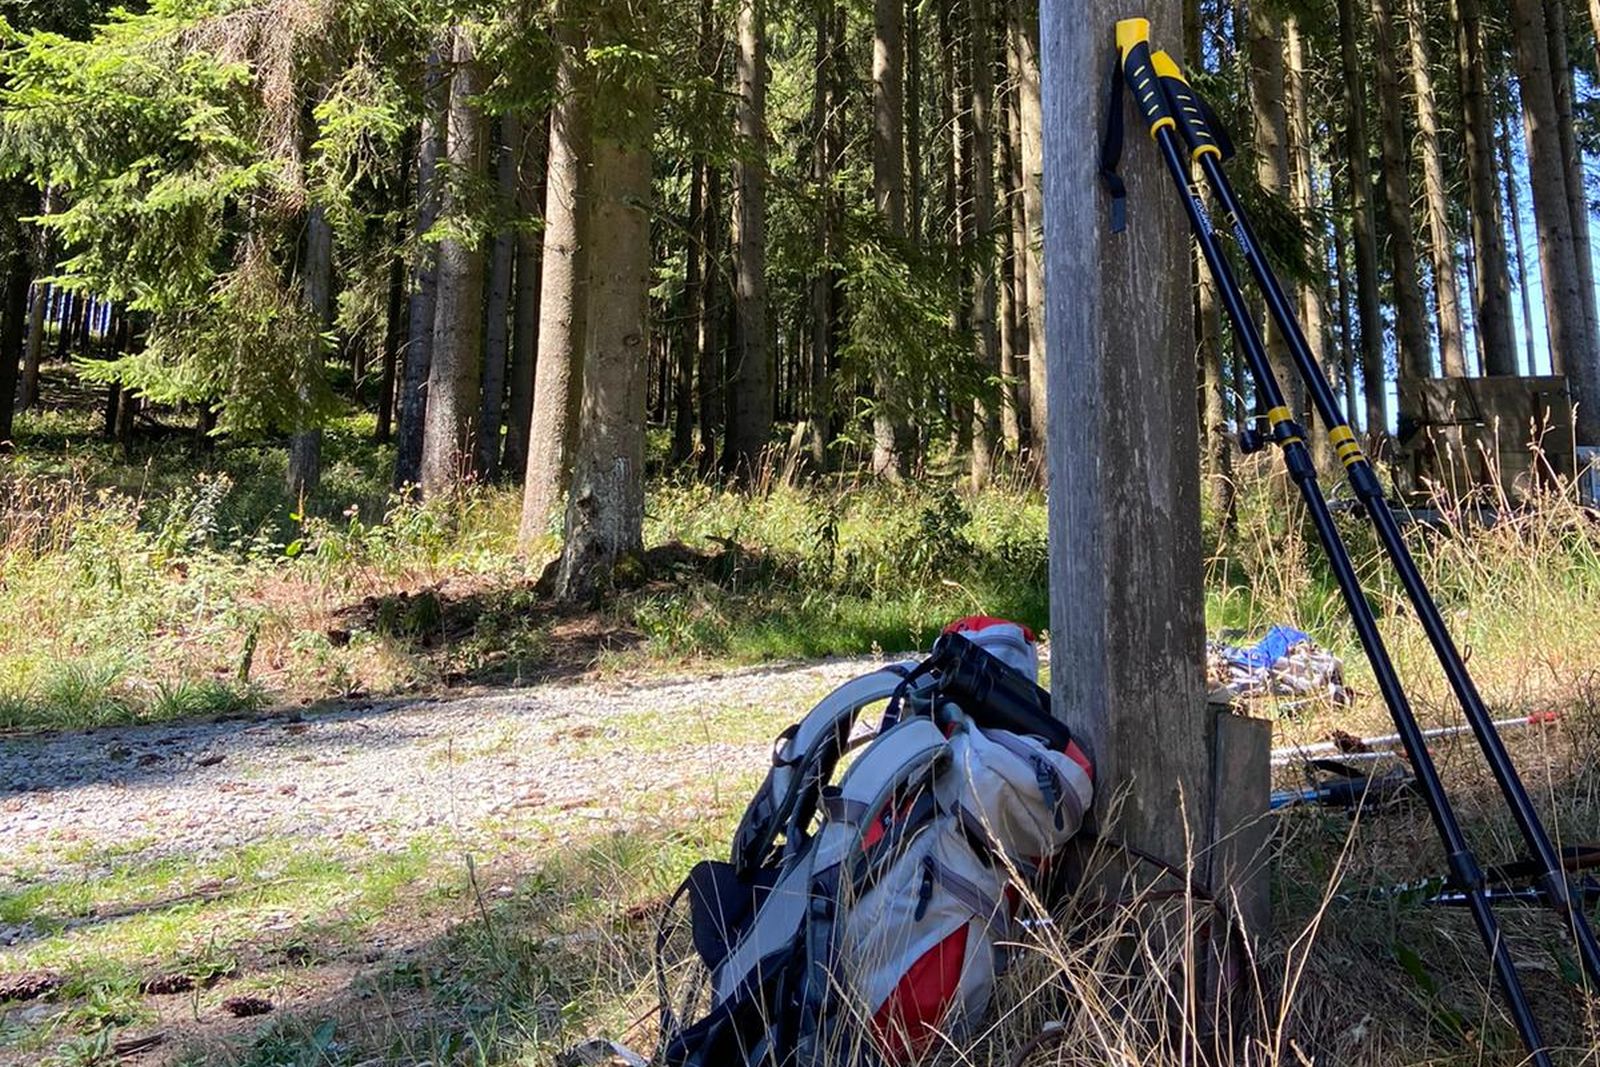 Backpack and hiking poles laid down for a break in the forest